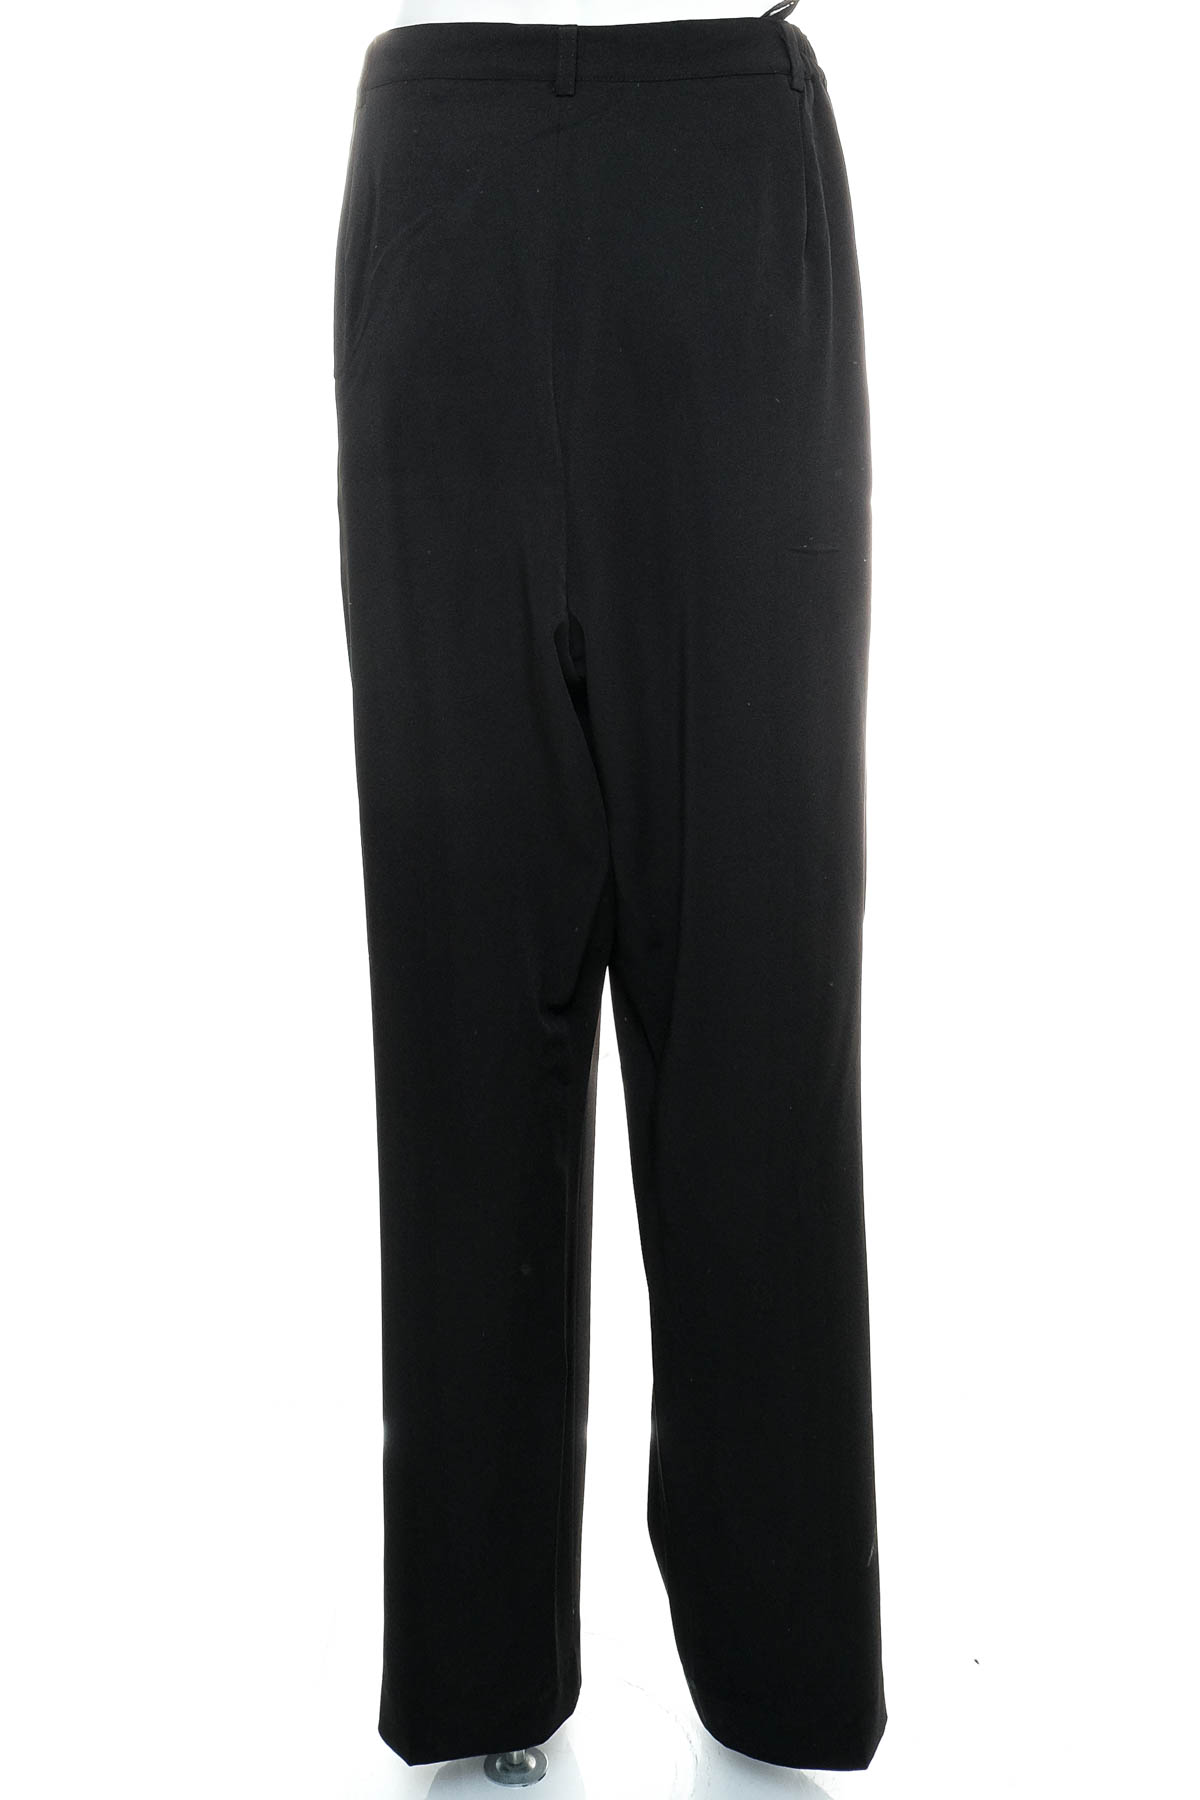 Women's trousers - AproductZ - 1